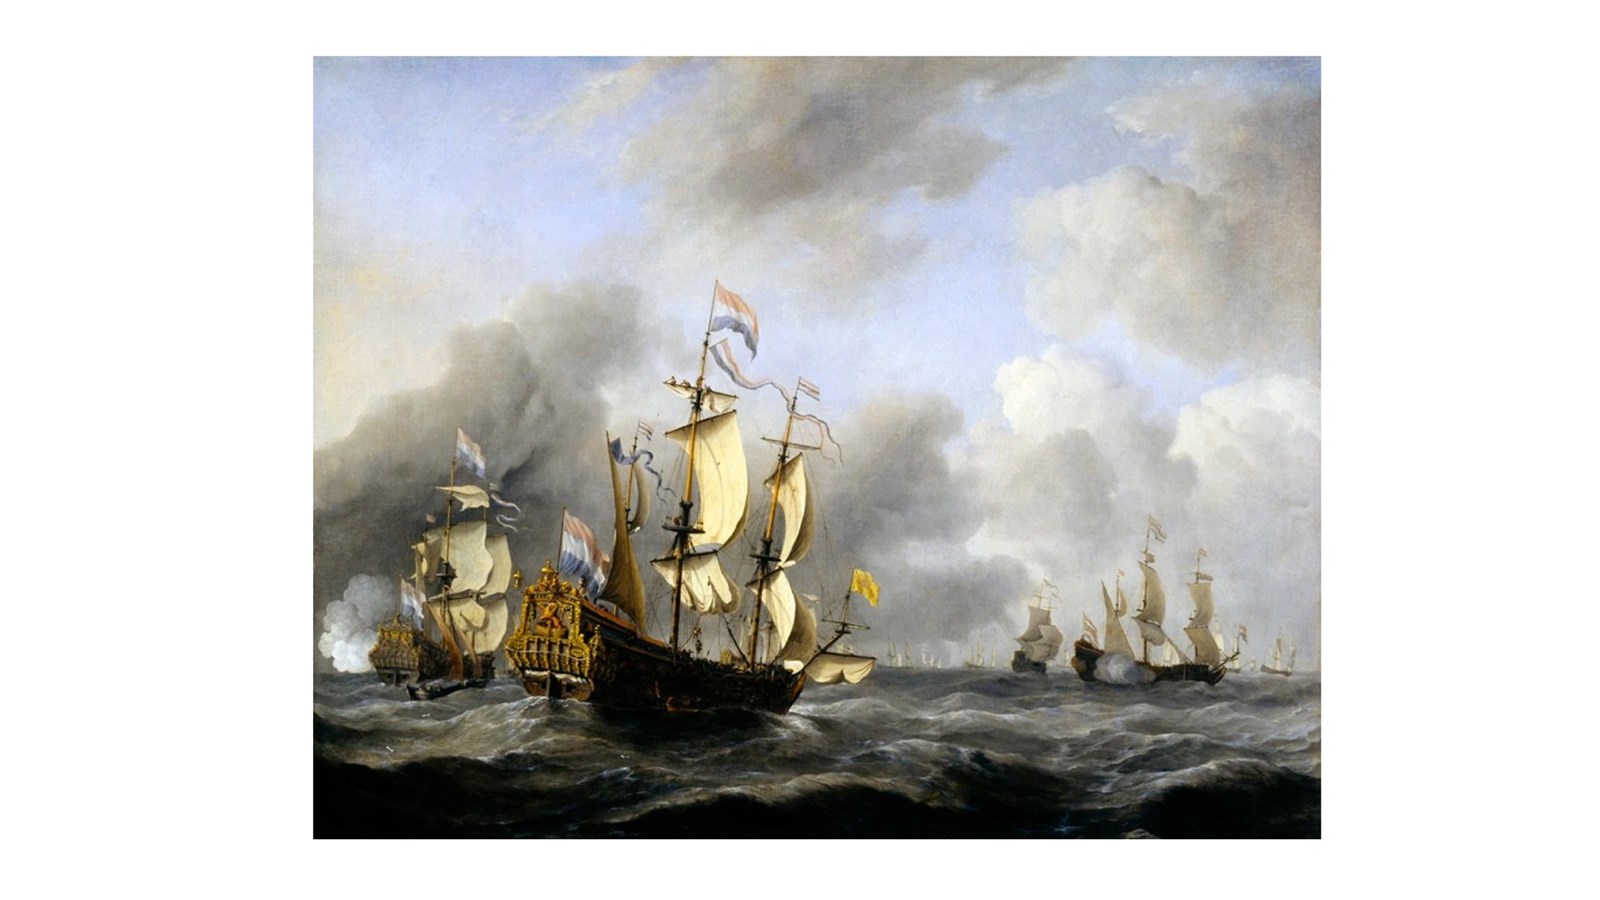 a nautical painting showing 4 rigged vessels with masts and sails on a cloudy day. The ships are progressively further away from the viewers eye.